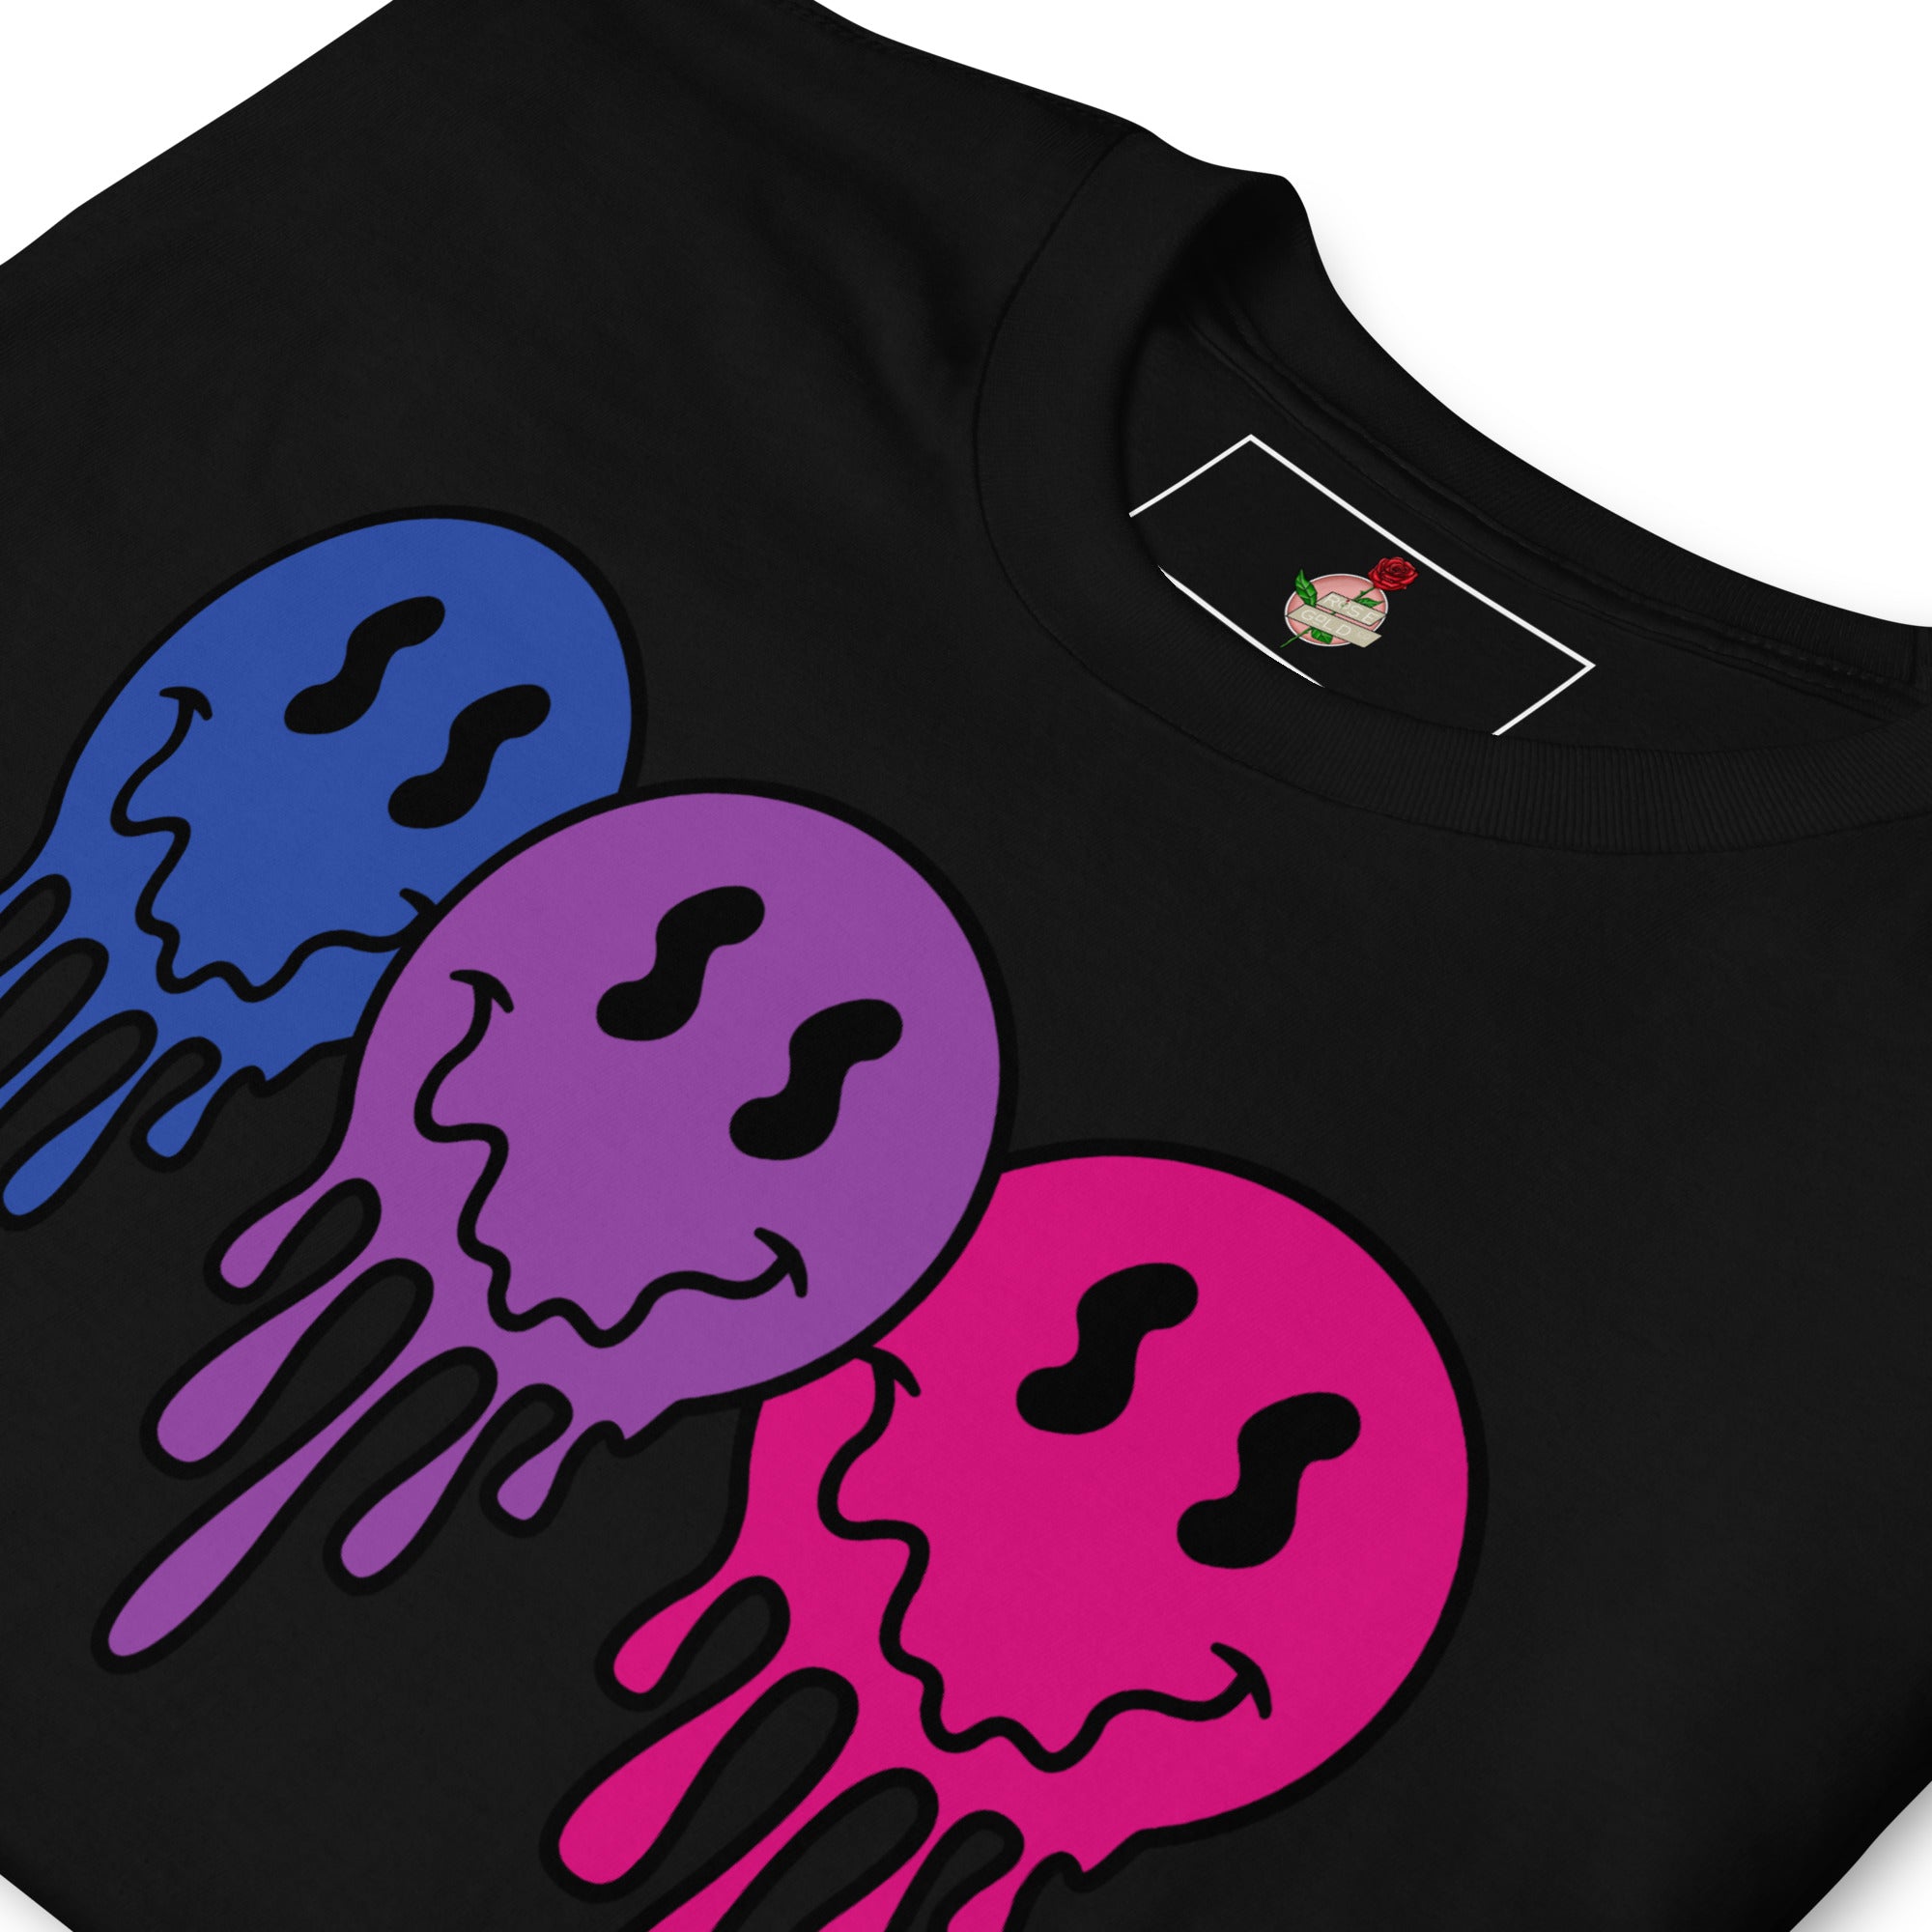 The Bisexual Pride Smiley Face Unisex T-Shirt